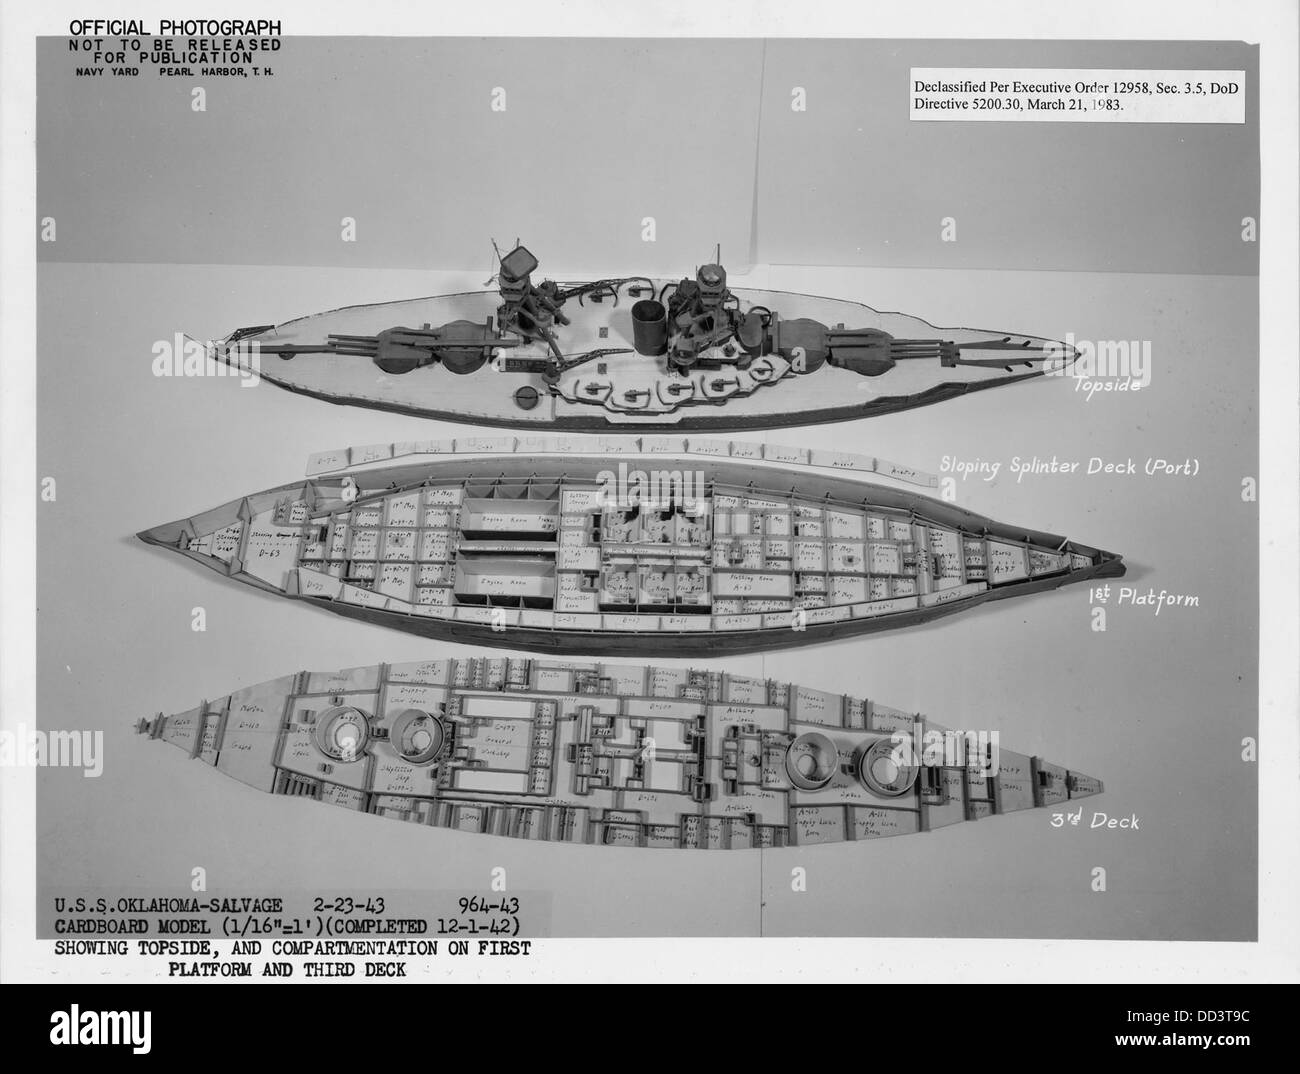 USS Oklahoma- Salvage 2-23-43, 964-43, Cardboard model (1-16 = 1') (completed 12-1-42) showing topside, and... - - 296962 Stock Photo